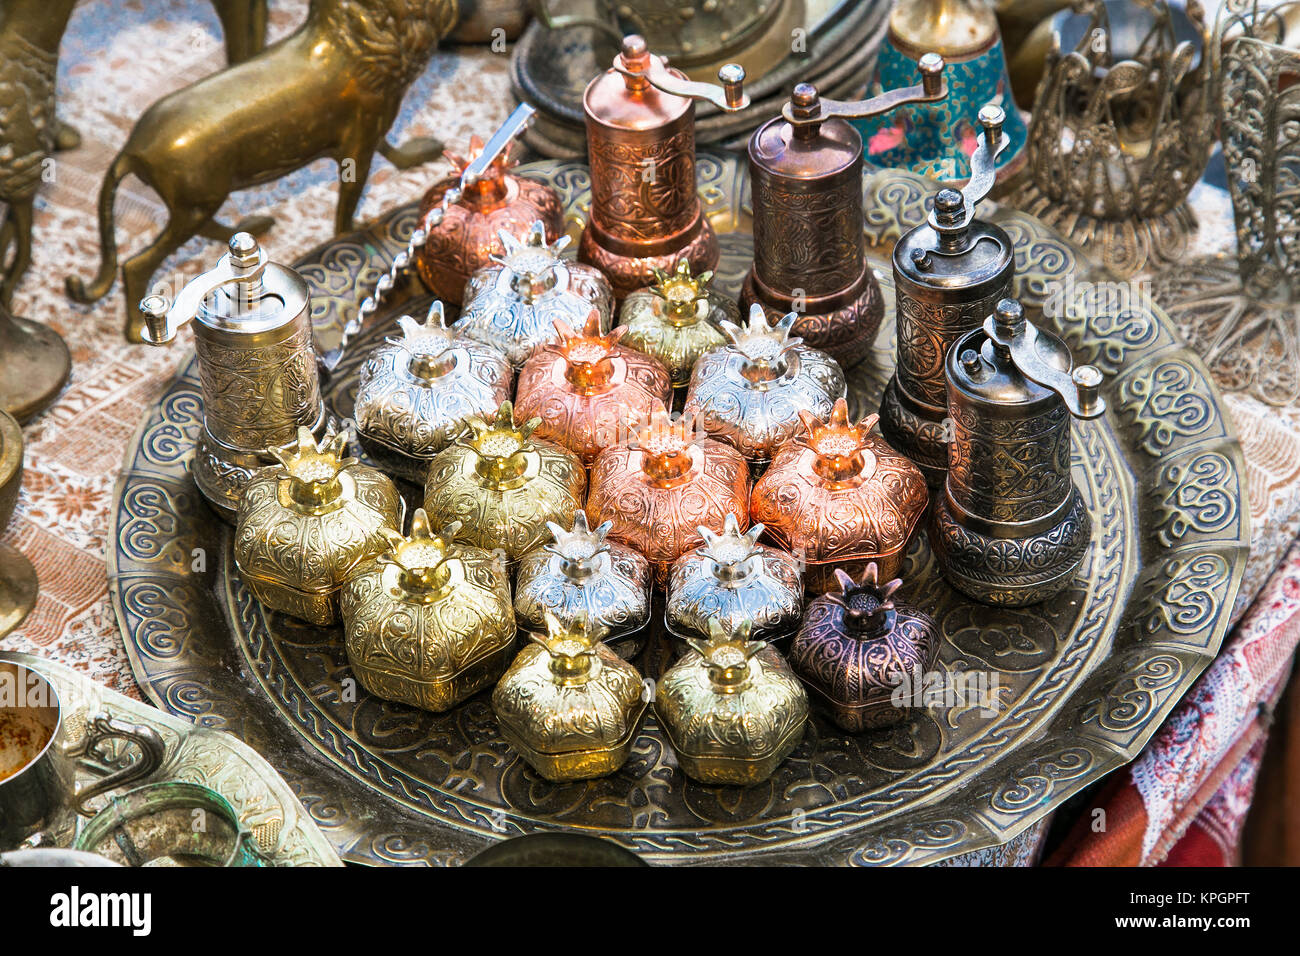 Old oriental antiques barass sugar bowl and caffee grinder on a tray at  street market in Baku city, Azerbeijan. Stock Photo